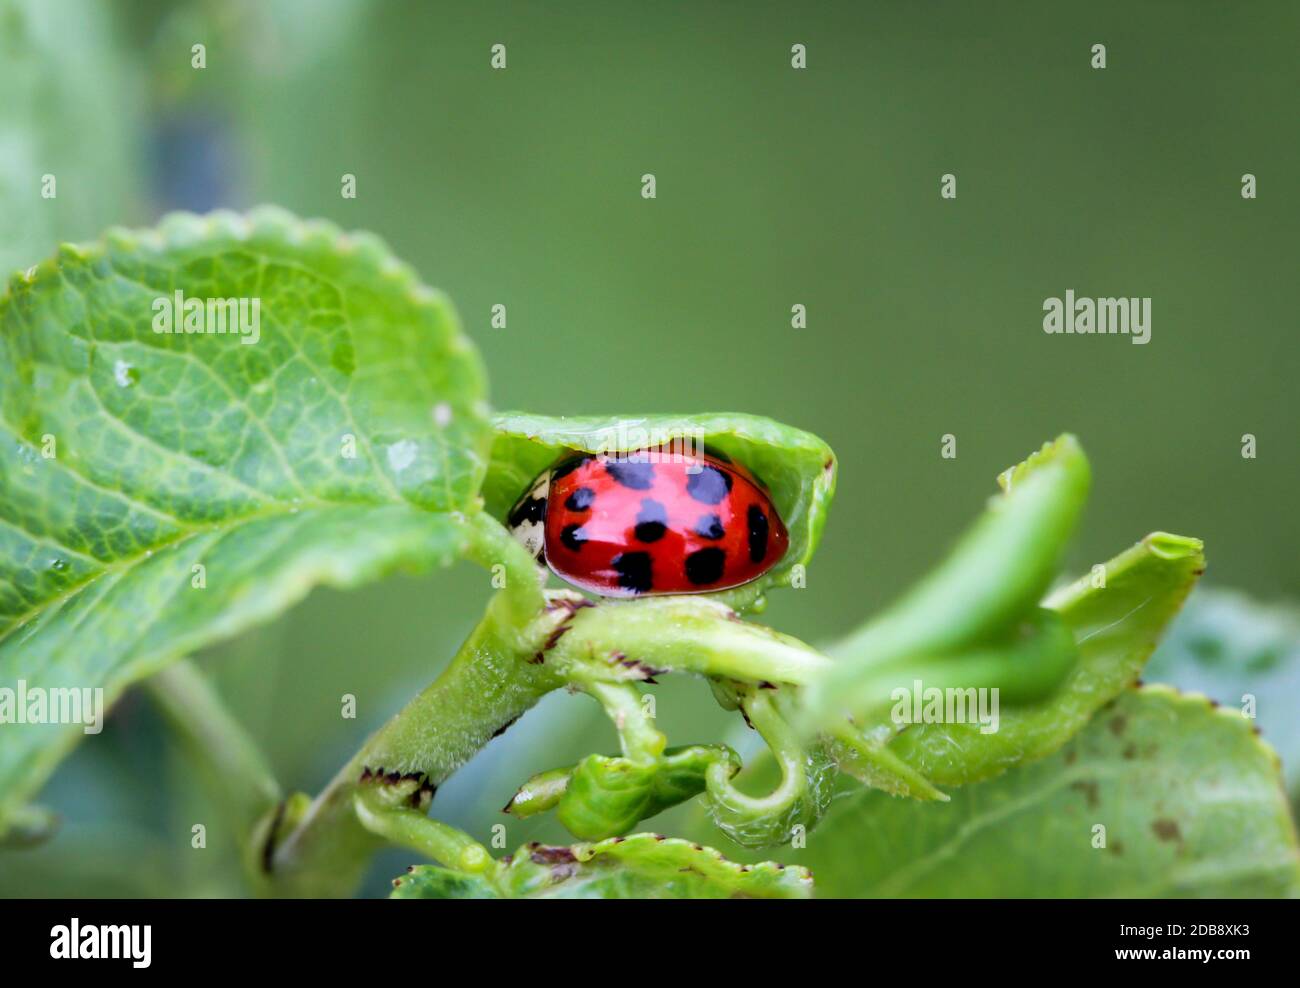 a ladybug is hiding in a rolled up leaf Stock Photo